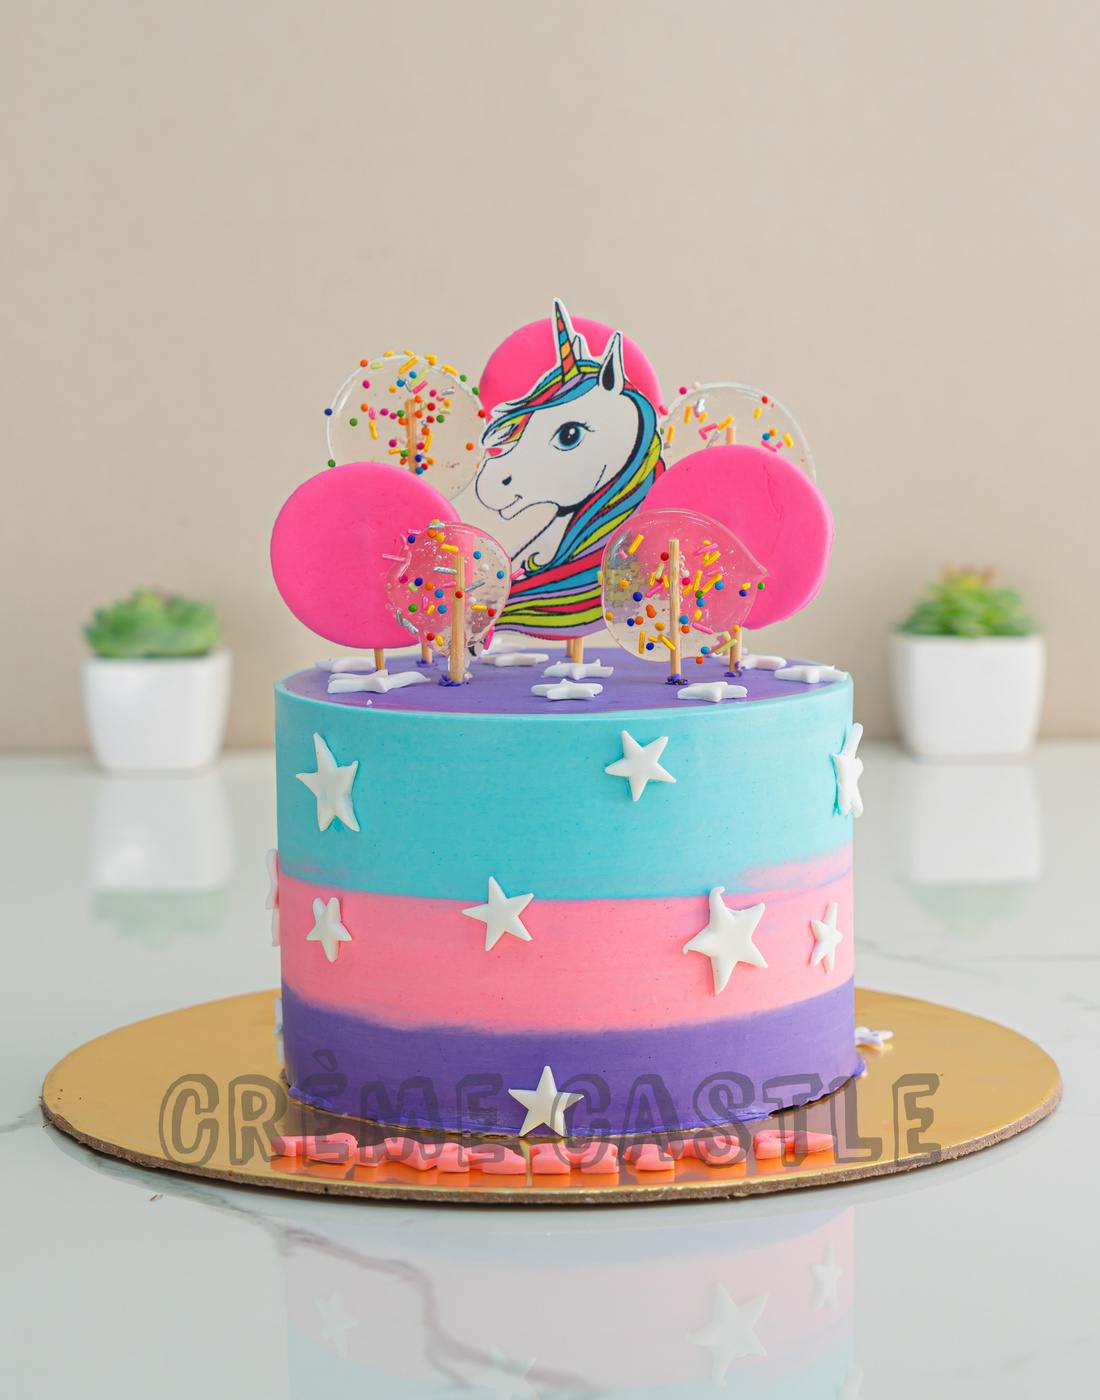 Unicorn Cake Designs To Check Out Today